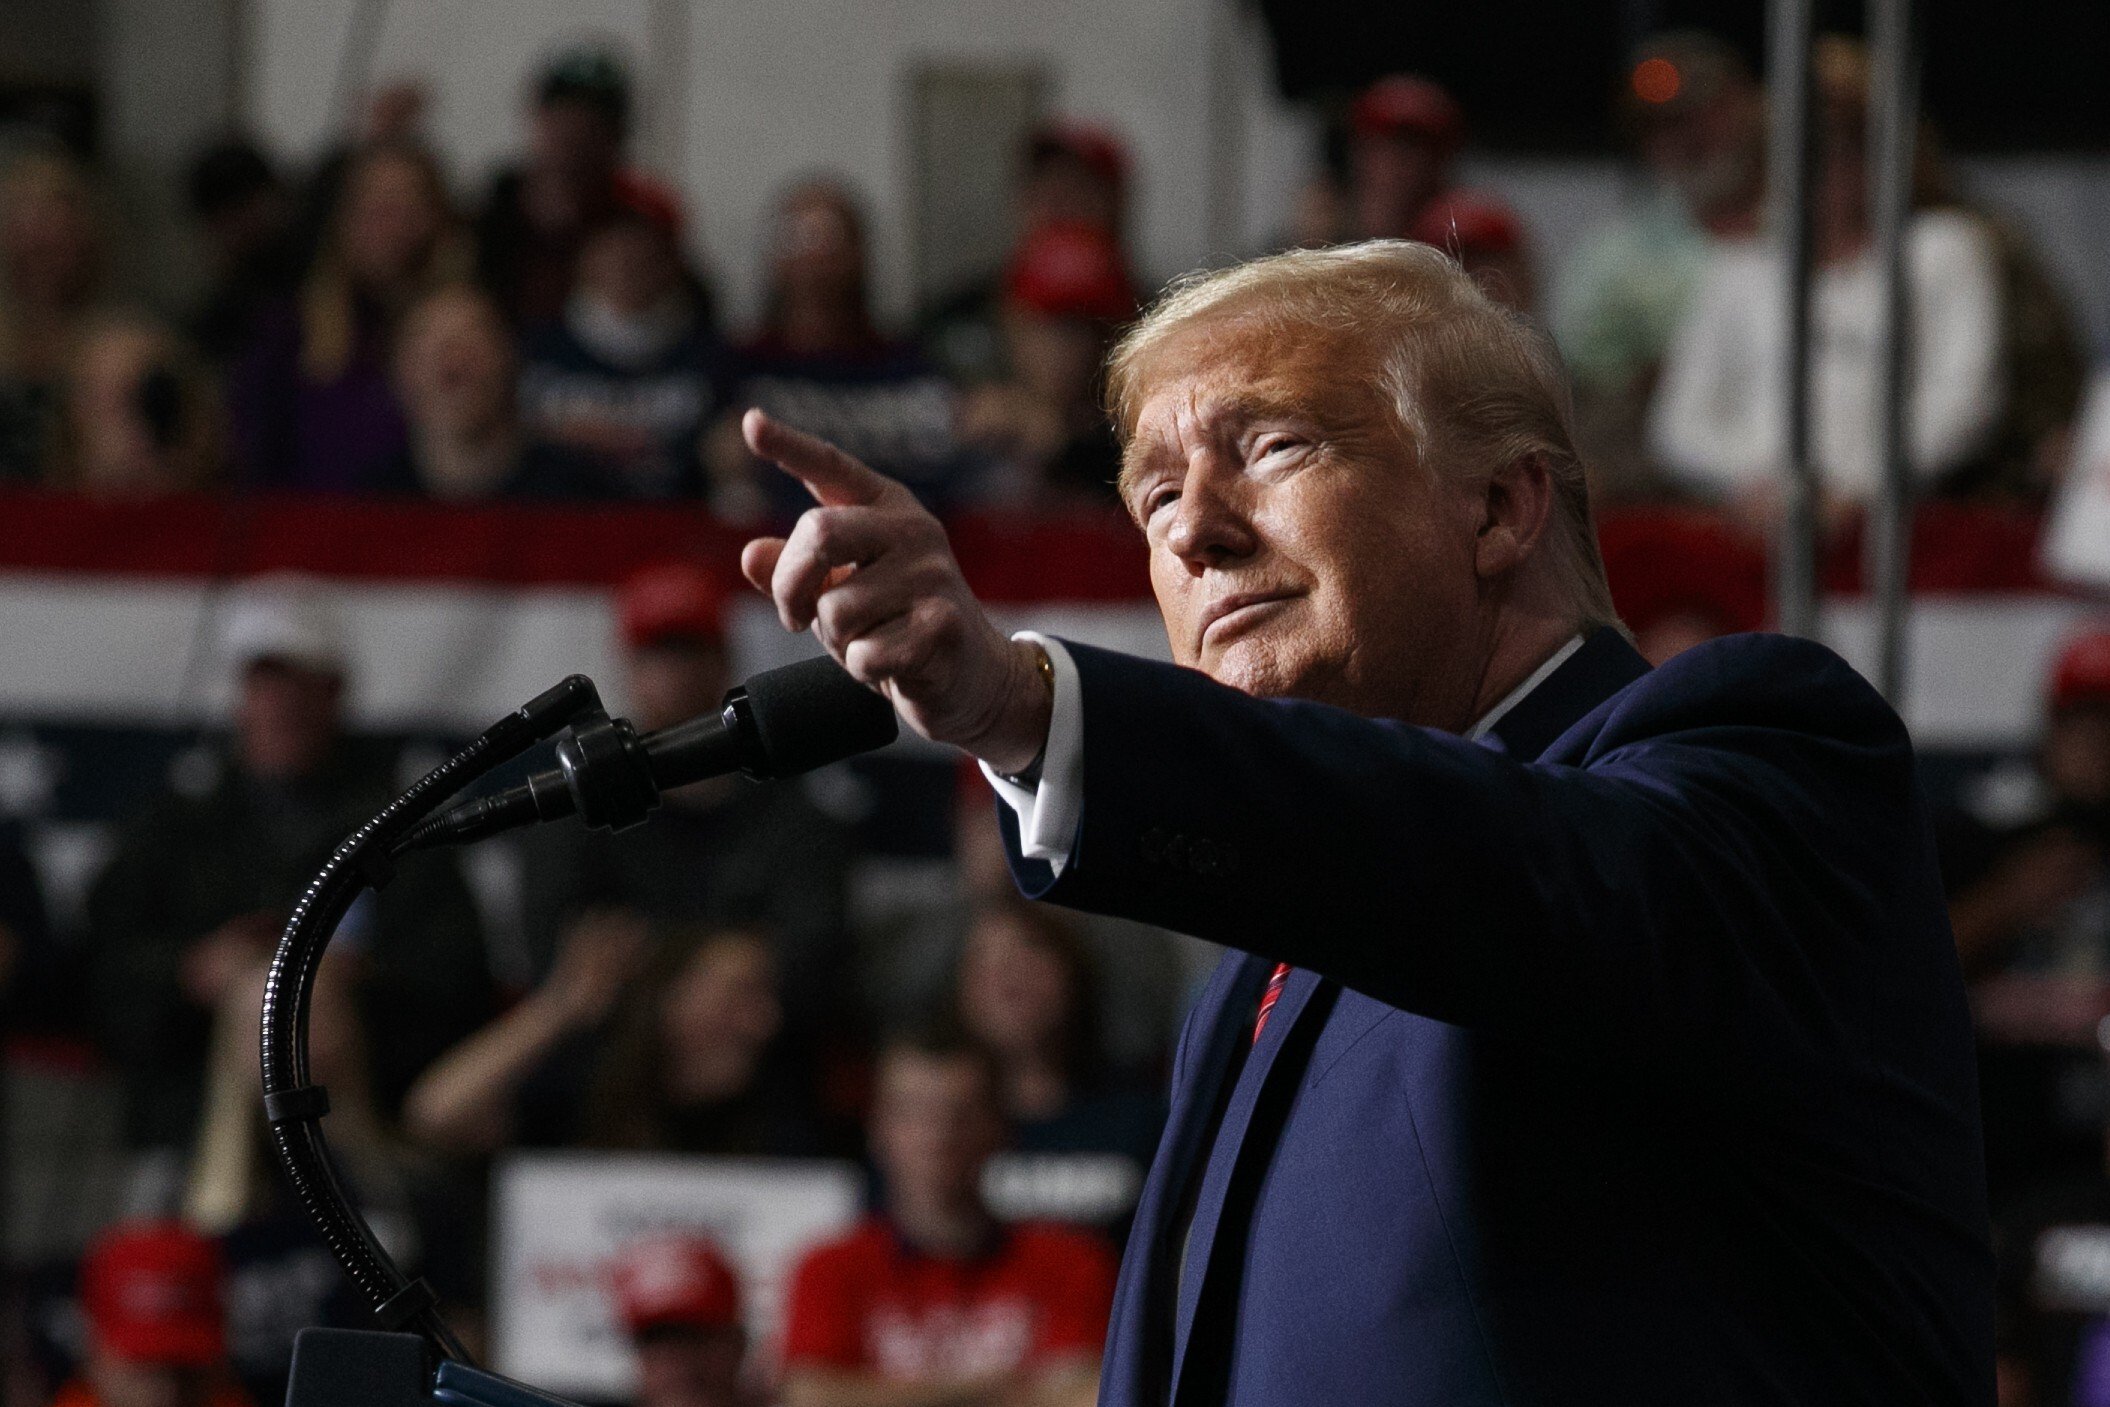 President Donald Trump speak at a campaign rally in North Charleston, South Carolina on February 28, 2020. Photo: AP